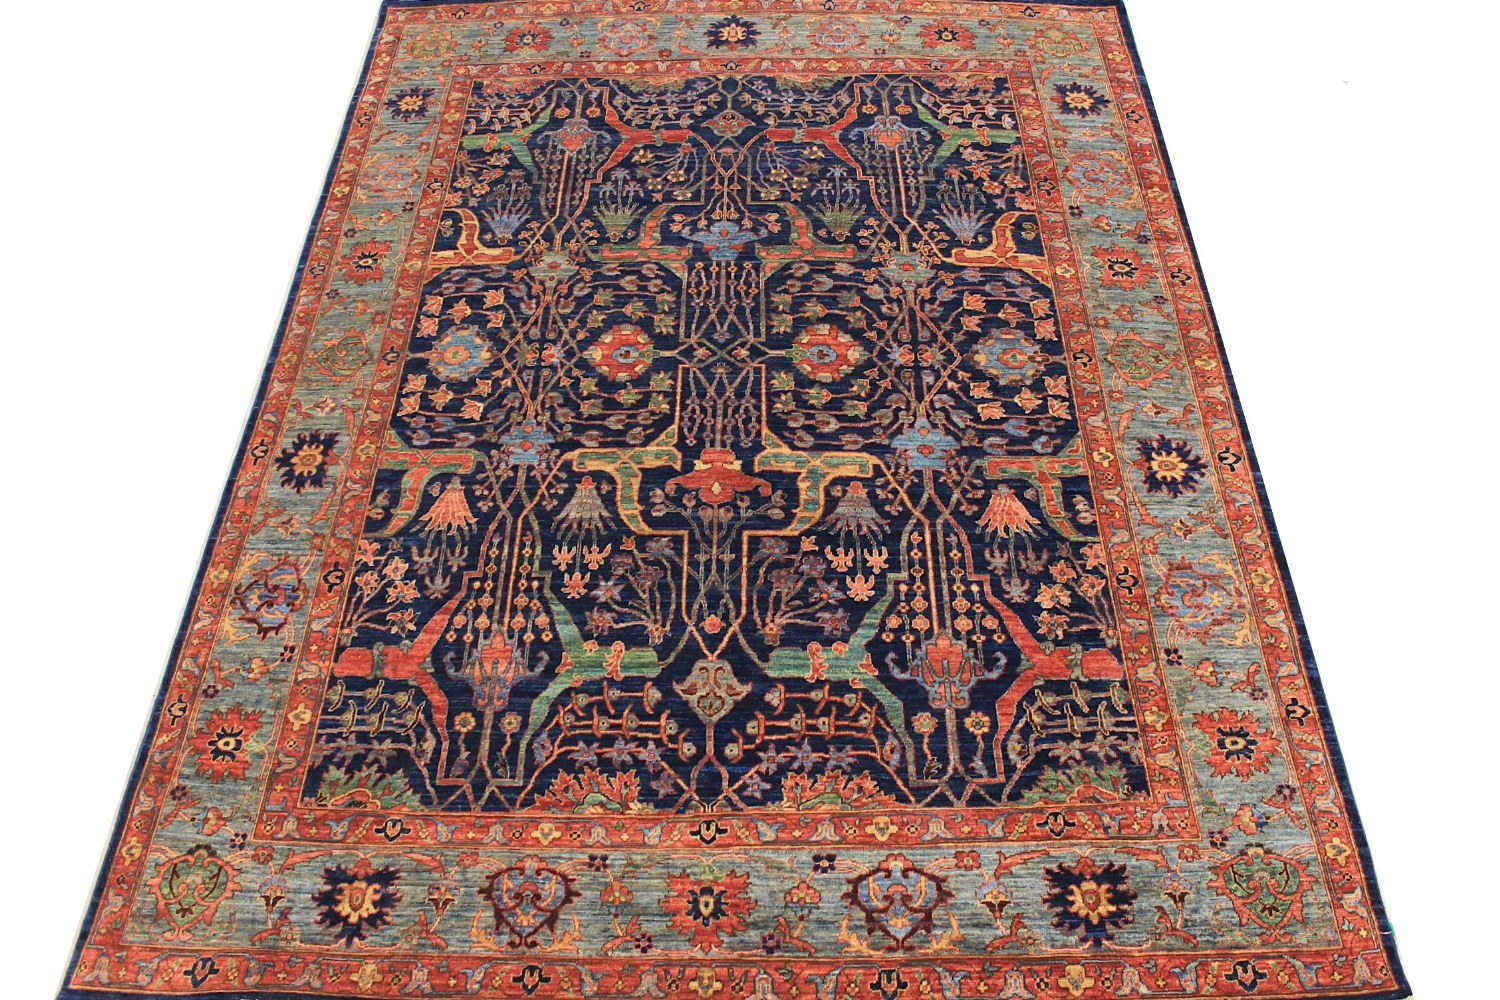 8x10 Aryana & Antique Revivals Hand Knotted Wool Area Rug - MR028842